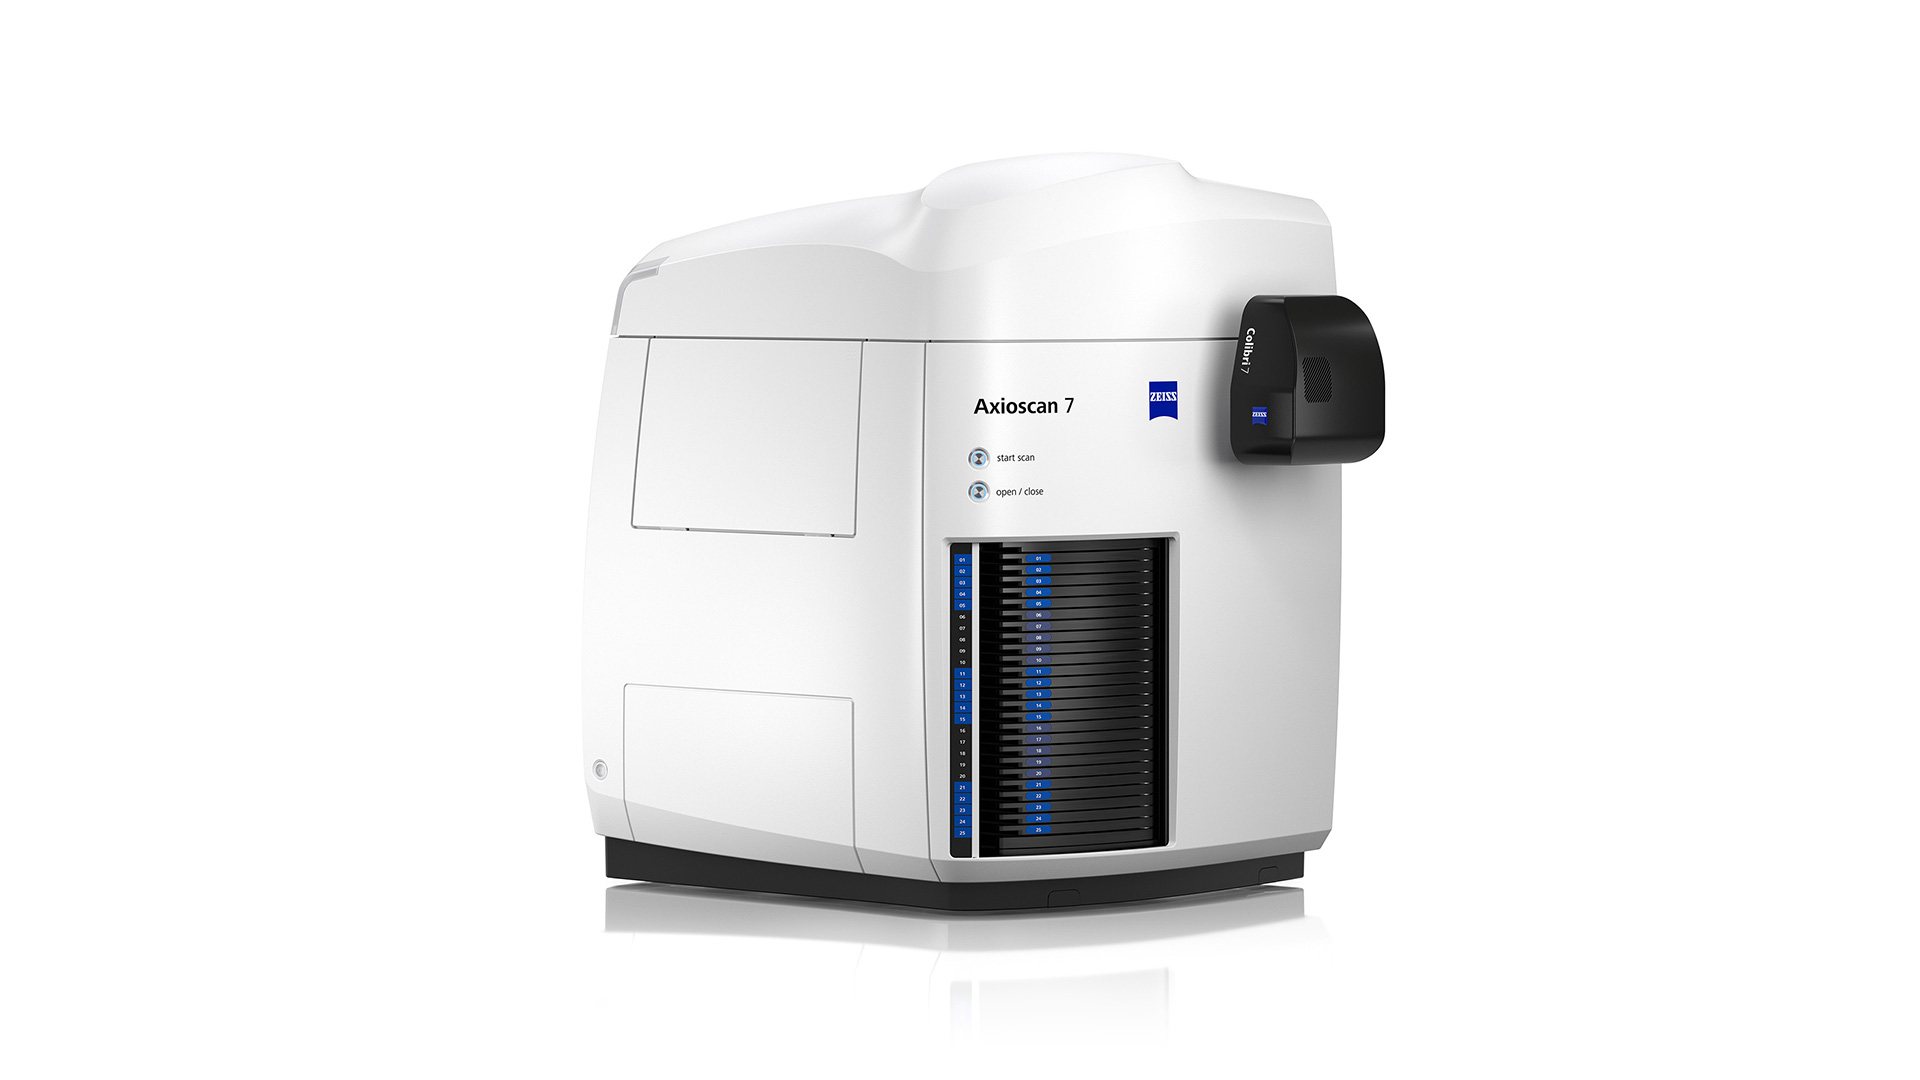 Microscopy slide scanner ZEISS Axioscan 7, equipped with ZEISS Colibri 7 for fluorescence applications